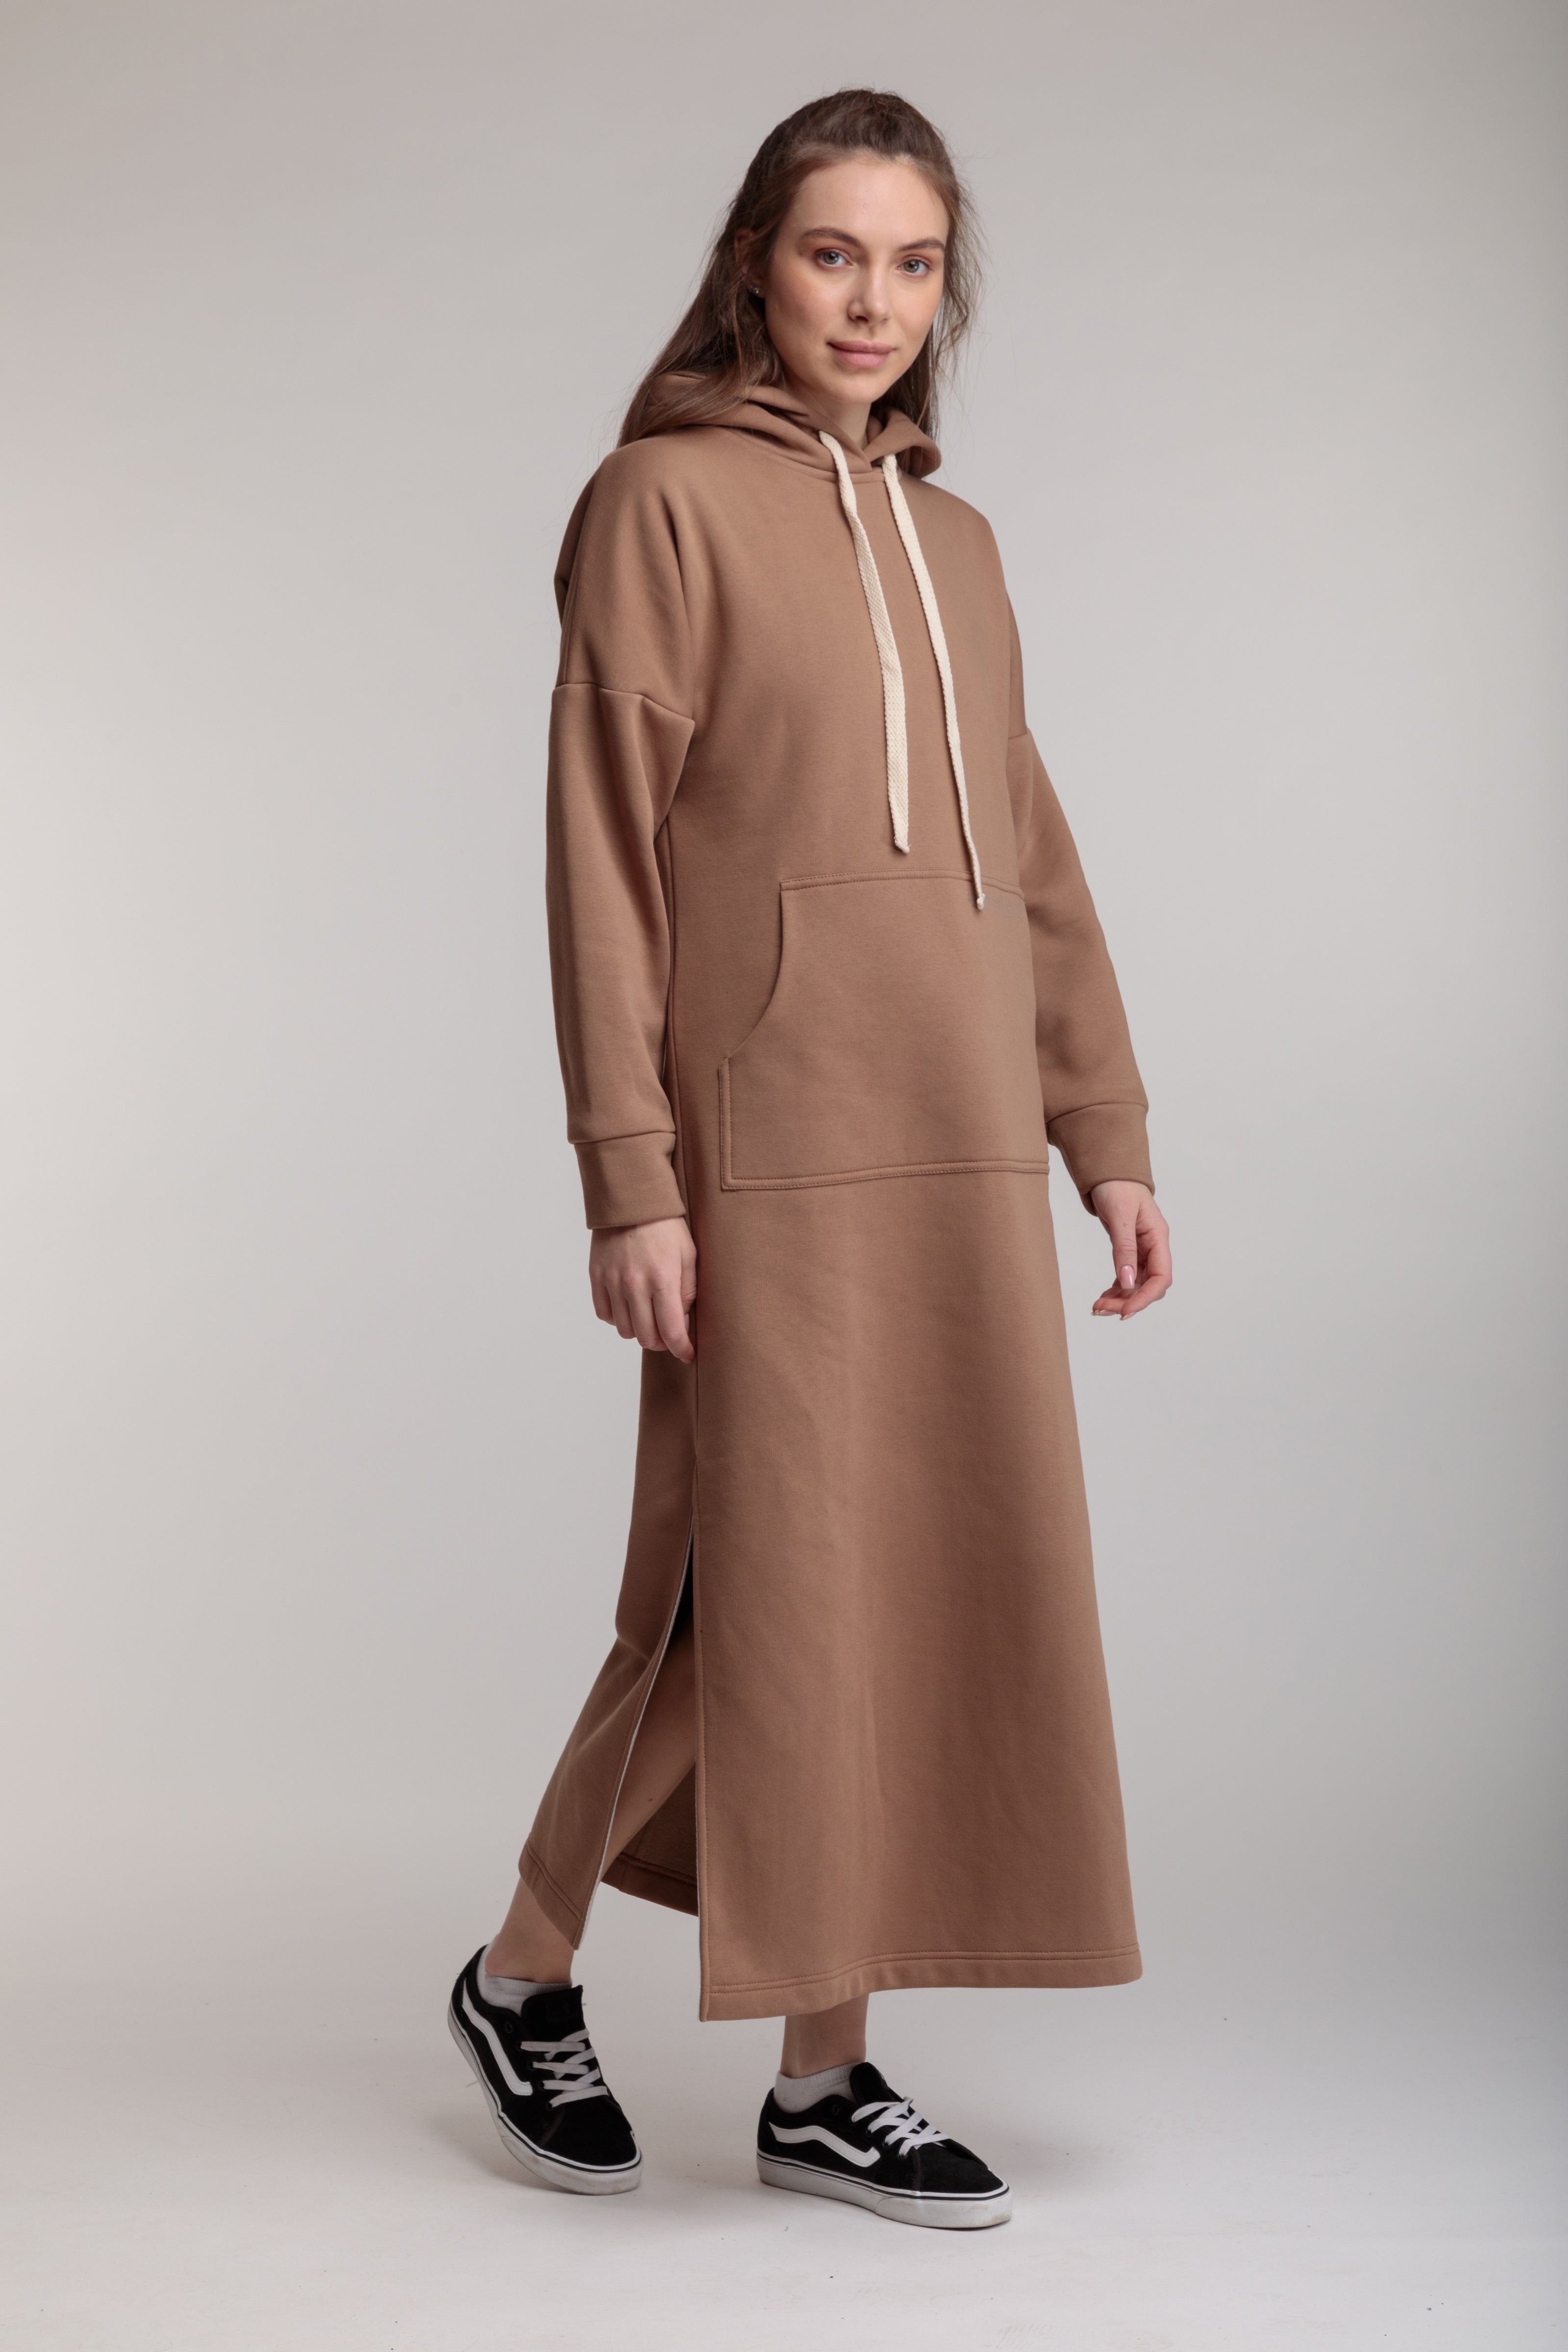 Long straight warm dress in beige color with slits, hood and pocket